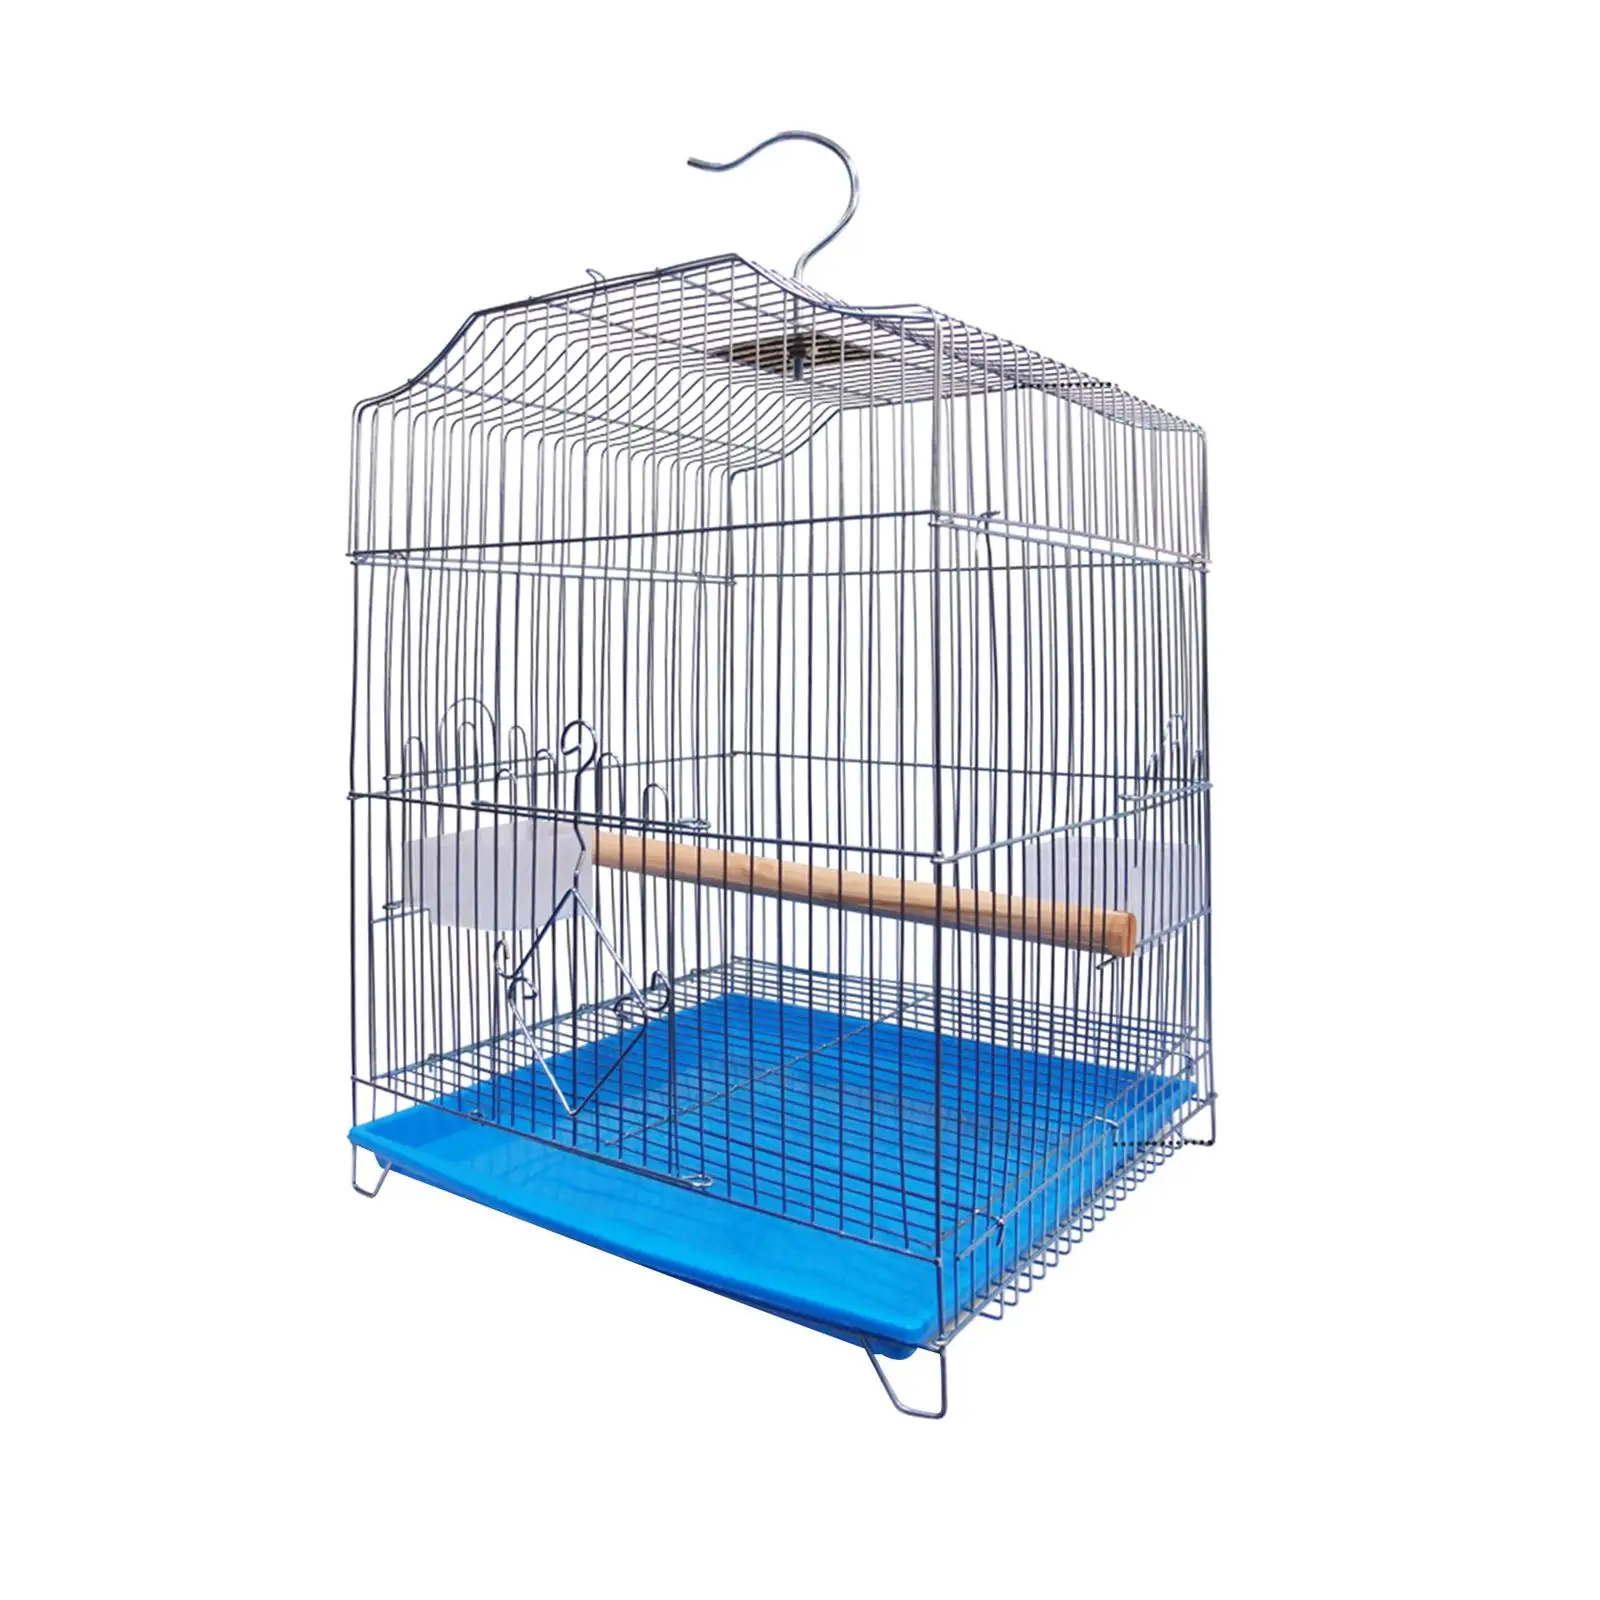 Large Bird Cage Stand Cage with Food Cup Hanging Parrot Finches Parakeet